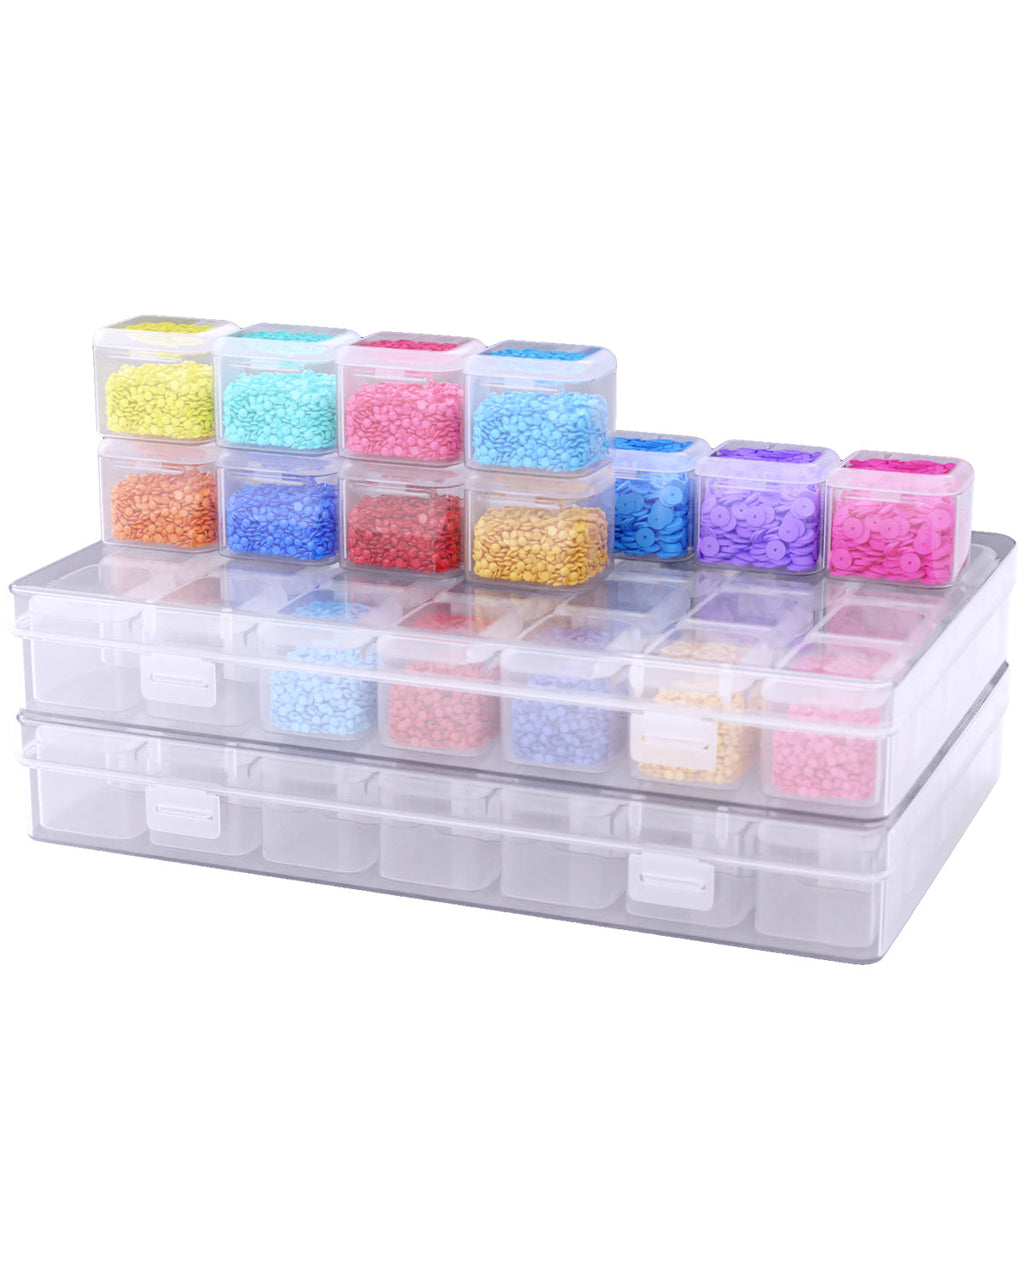 ARTDOT Diamond Painting Accessories Storage Containers,2 Pack 70